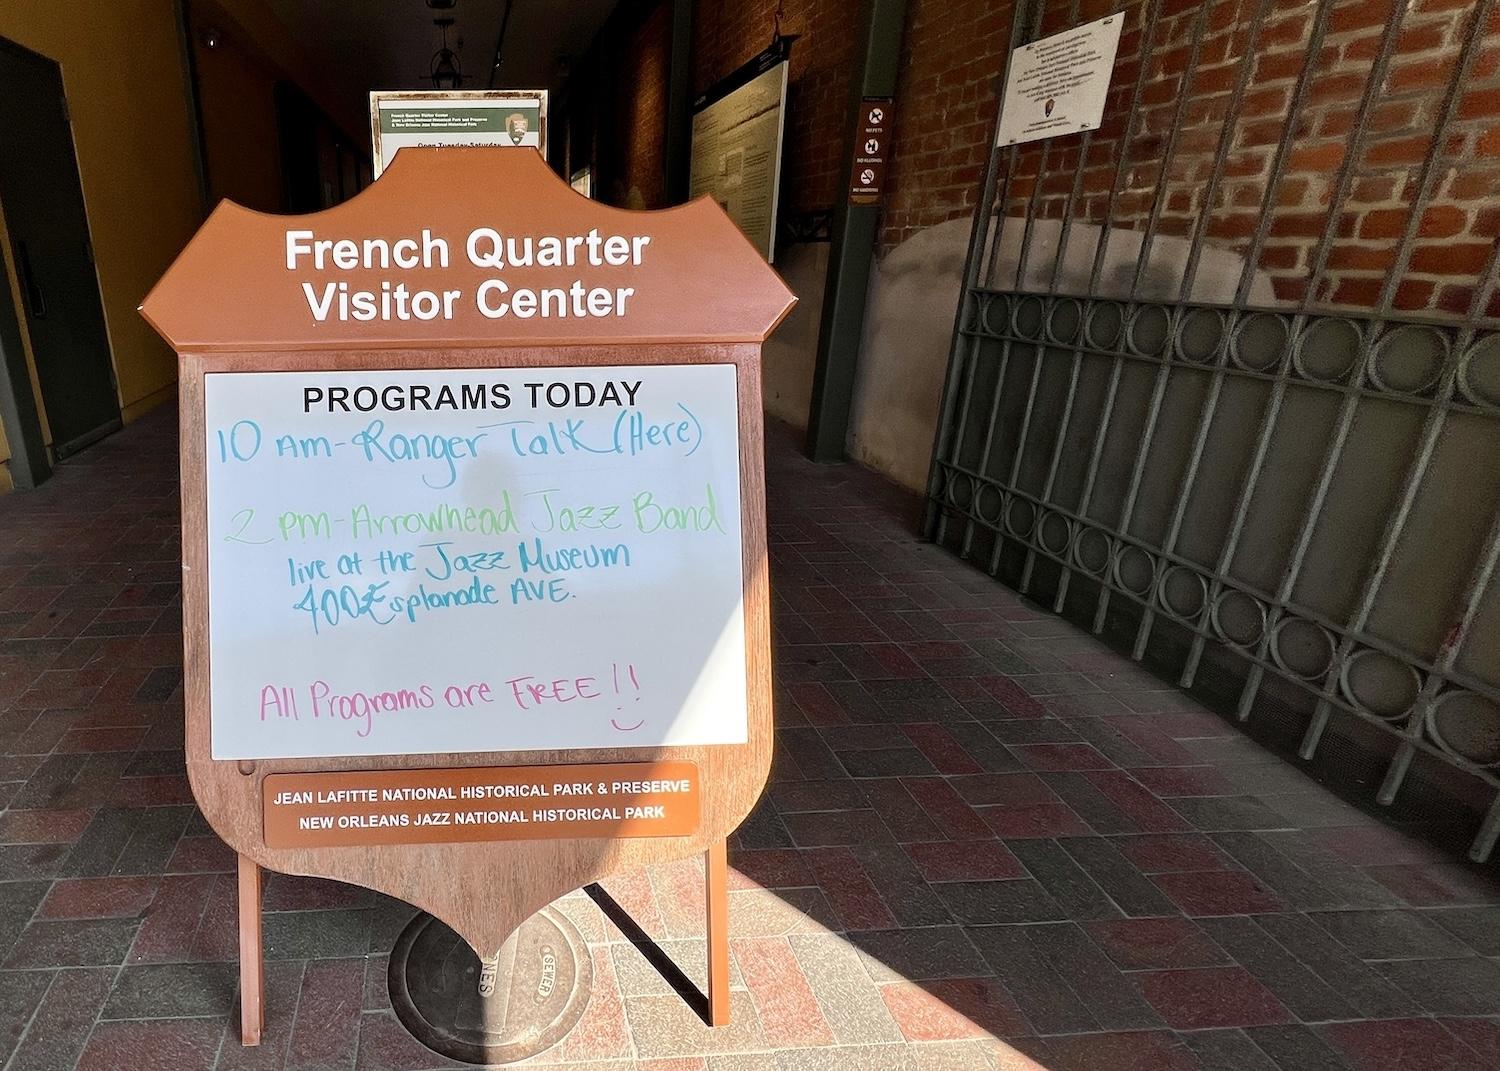 At the French Quarter visitor center shared by New Orleans Jazz National Historical Park and Jean Lafitte National Historical Park and Preserve, a sandwich board details daily activities.